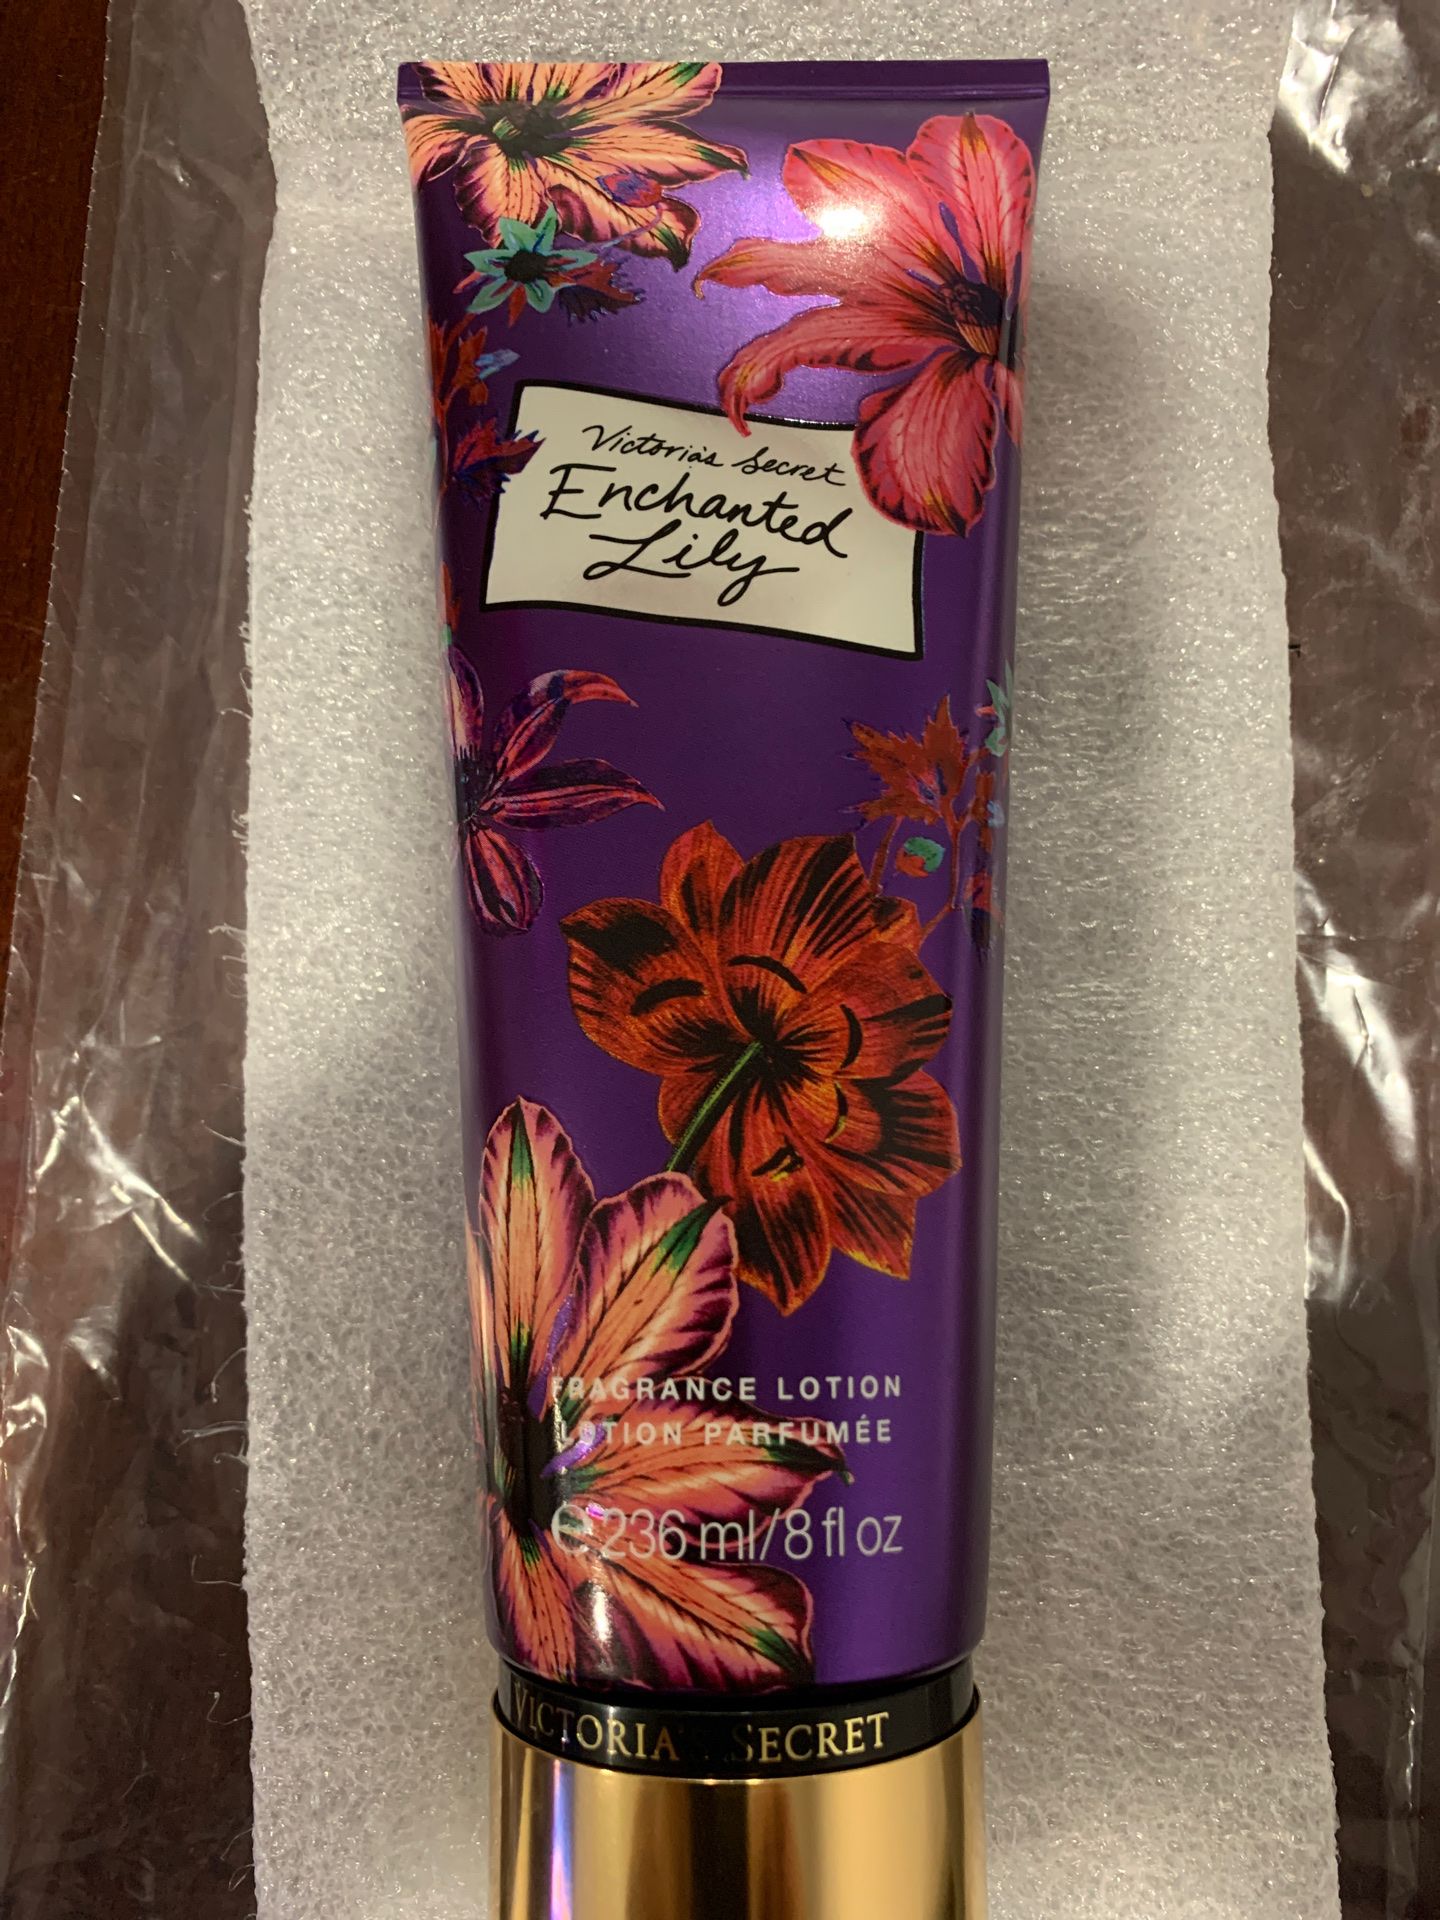 Fragrance VS Enchanted lily